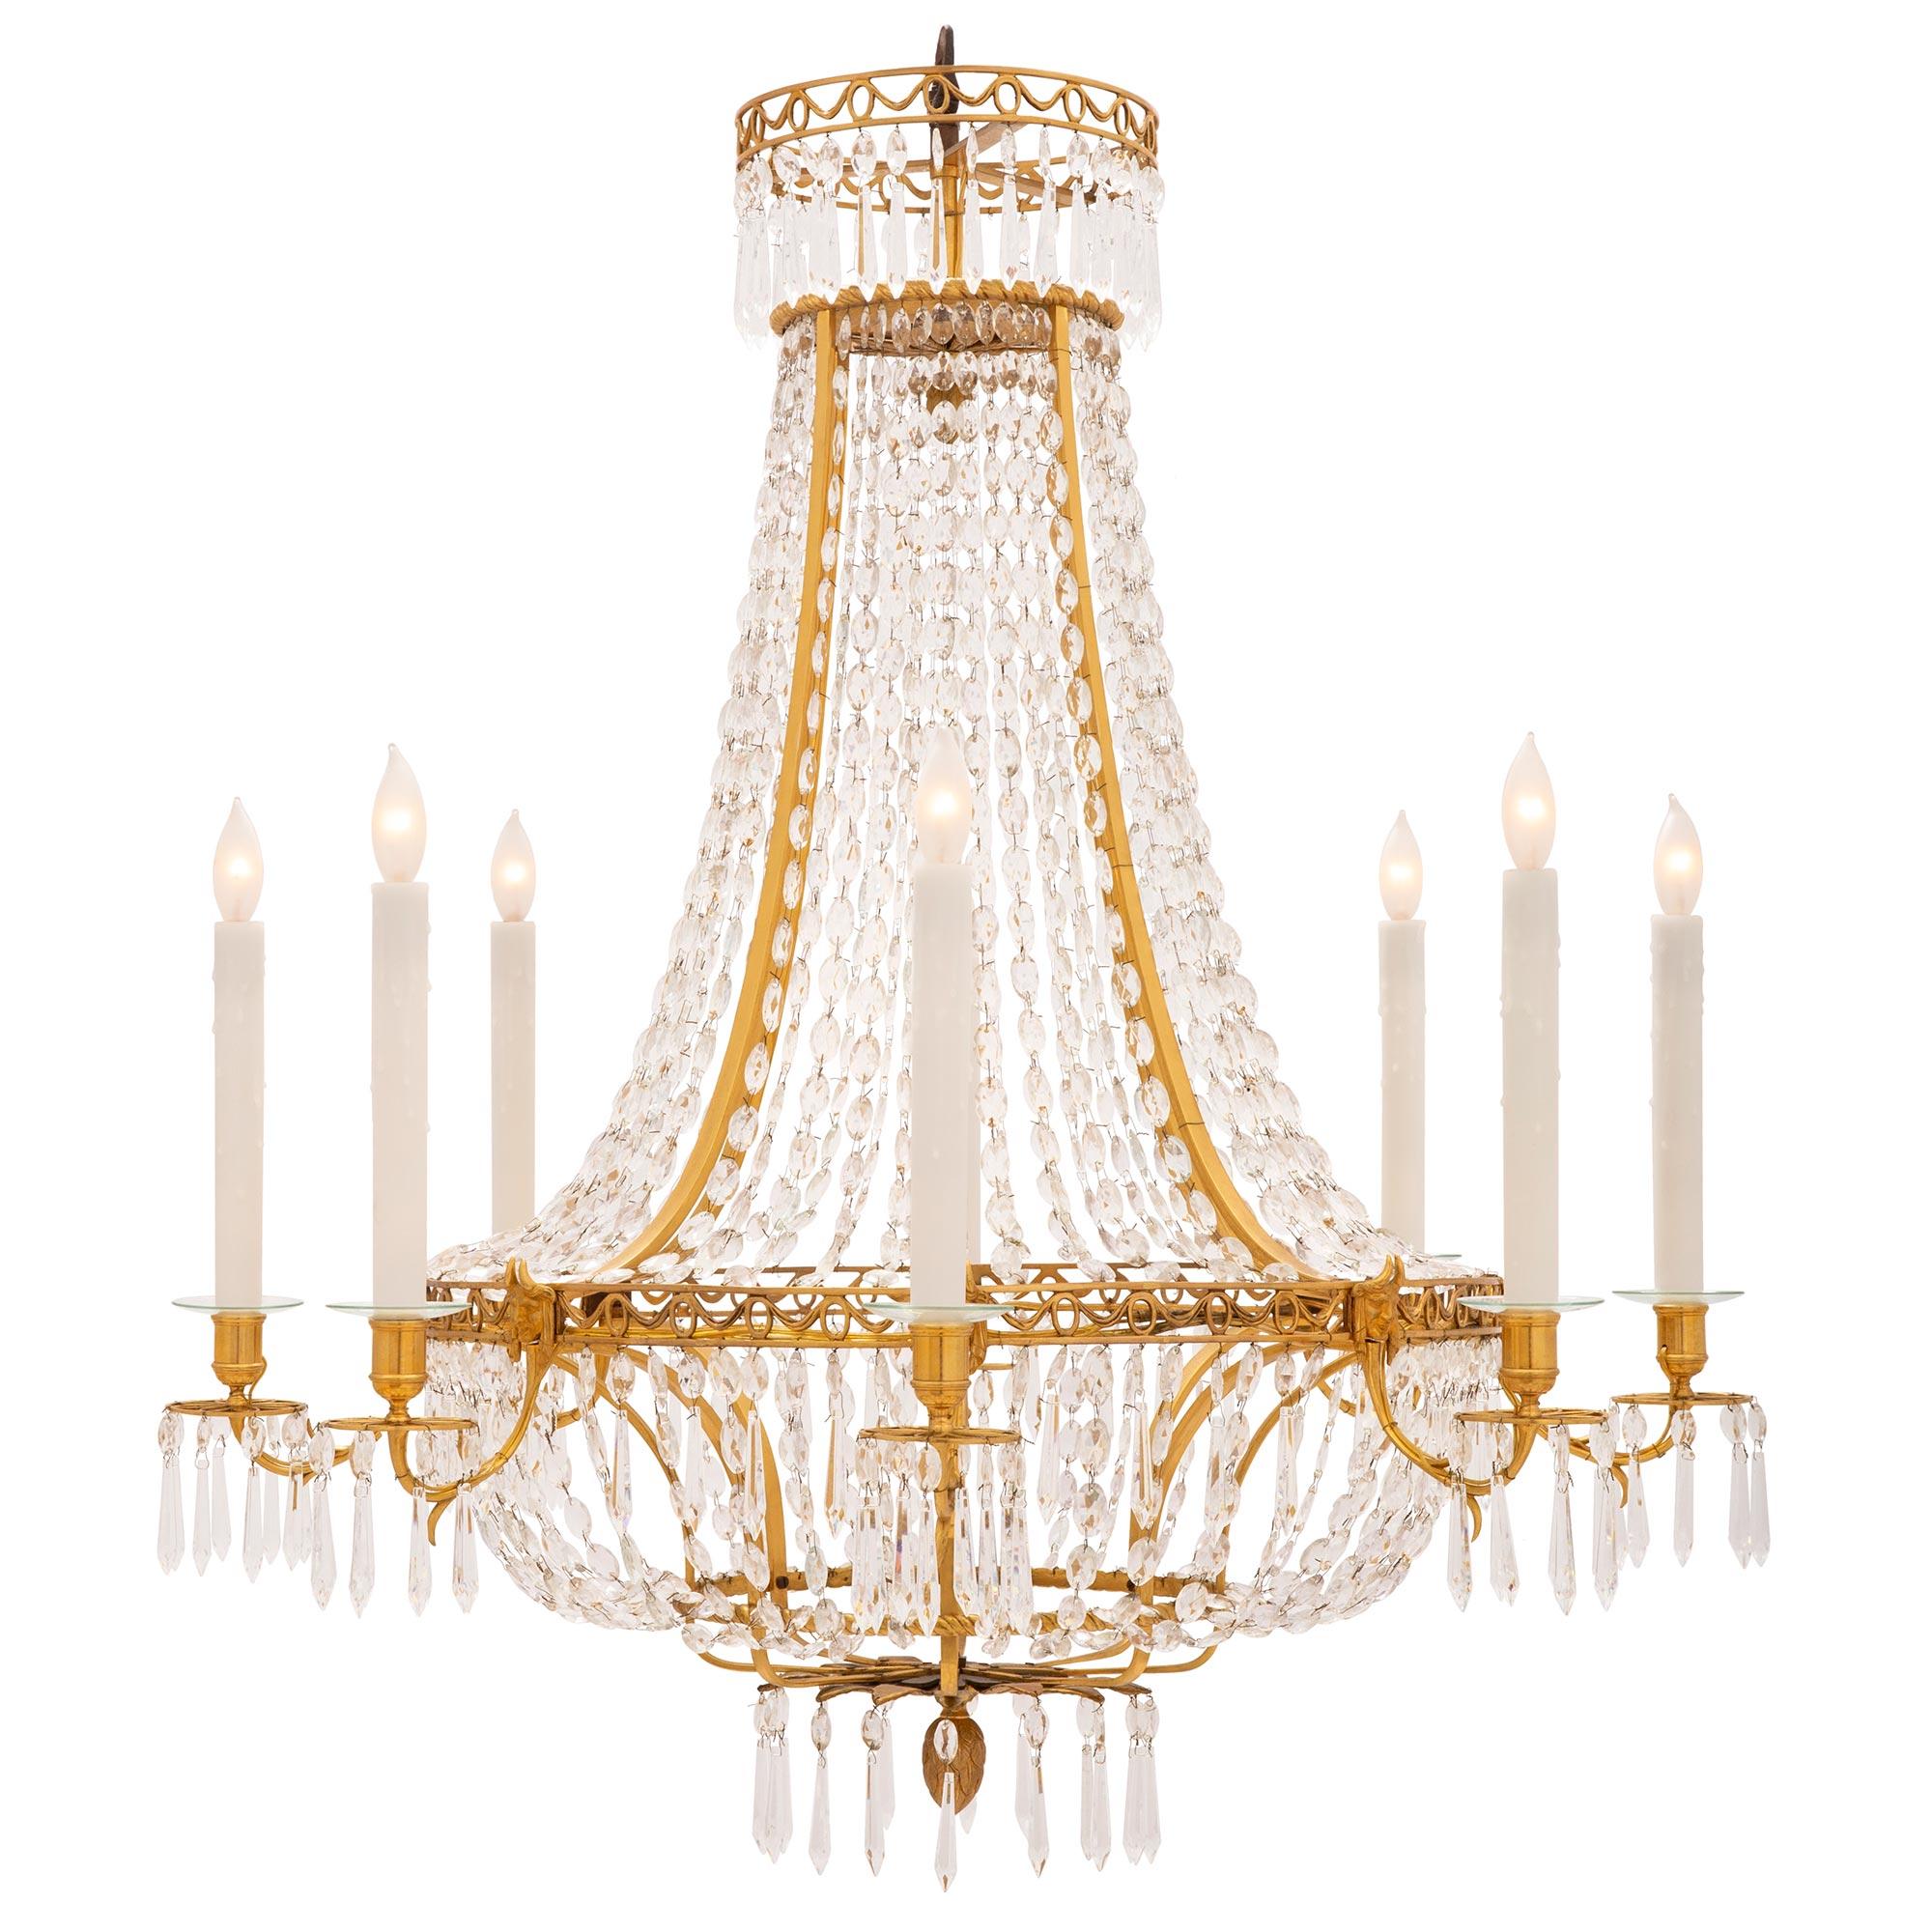 A stunning and very high quality pair of Baltic 19th century Neo-Classical st. ormolu and crystal chandeliers. Each eight arm chandelier is centered by a charming richly chased bottom ormolu acorn finial below fine leaves adorned with prism shaped